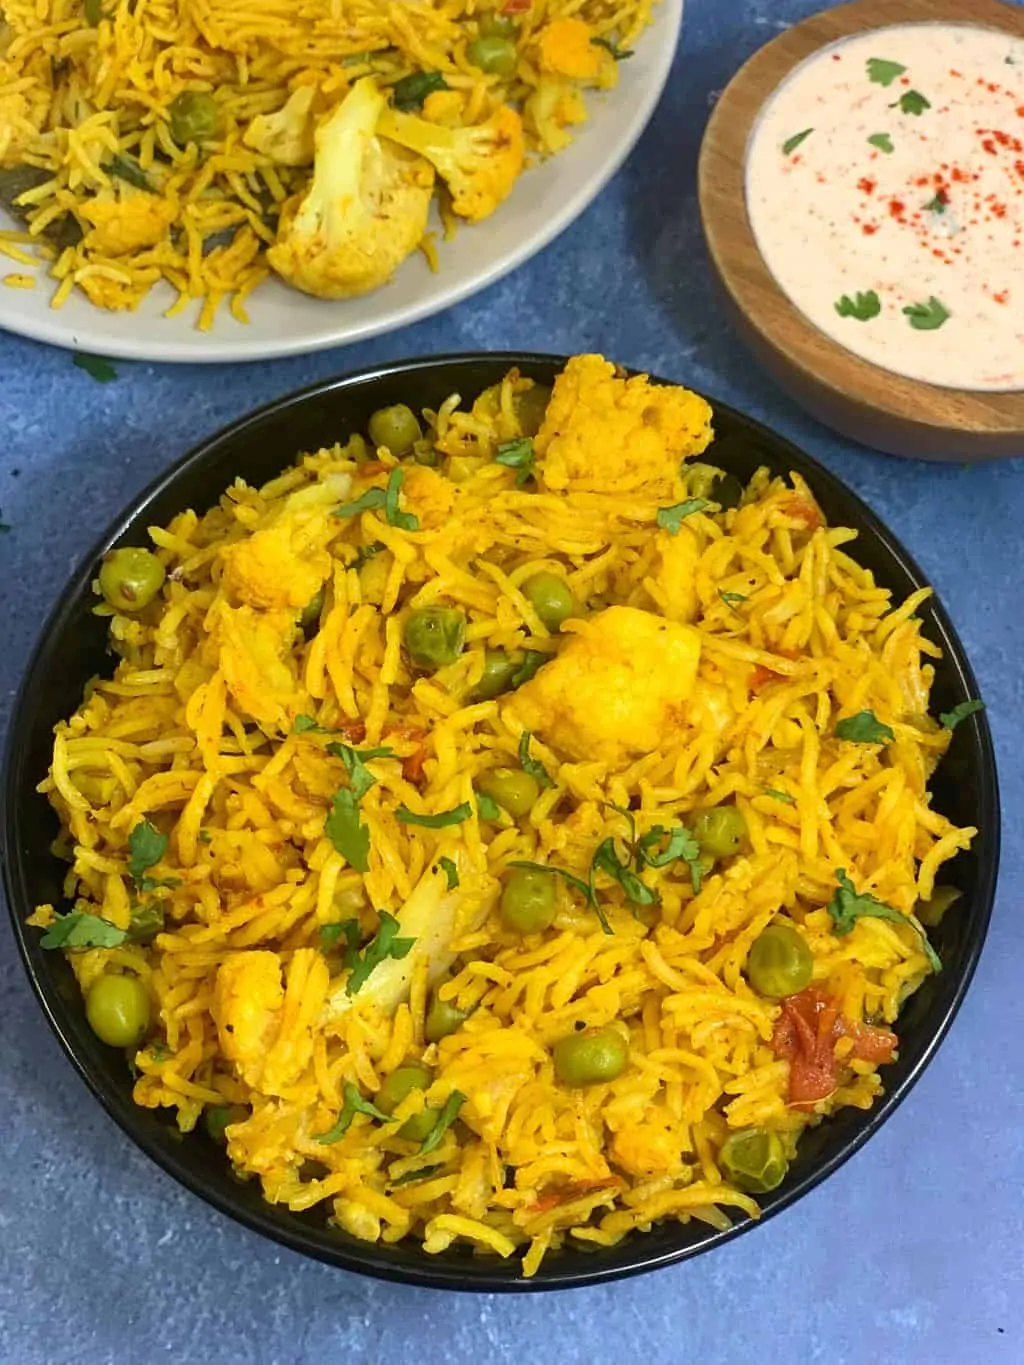 cauliflower Pulao recipe served in a bowl with raita on the side